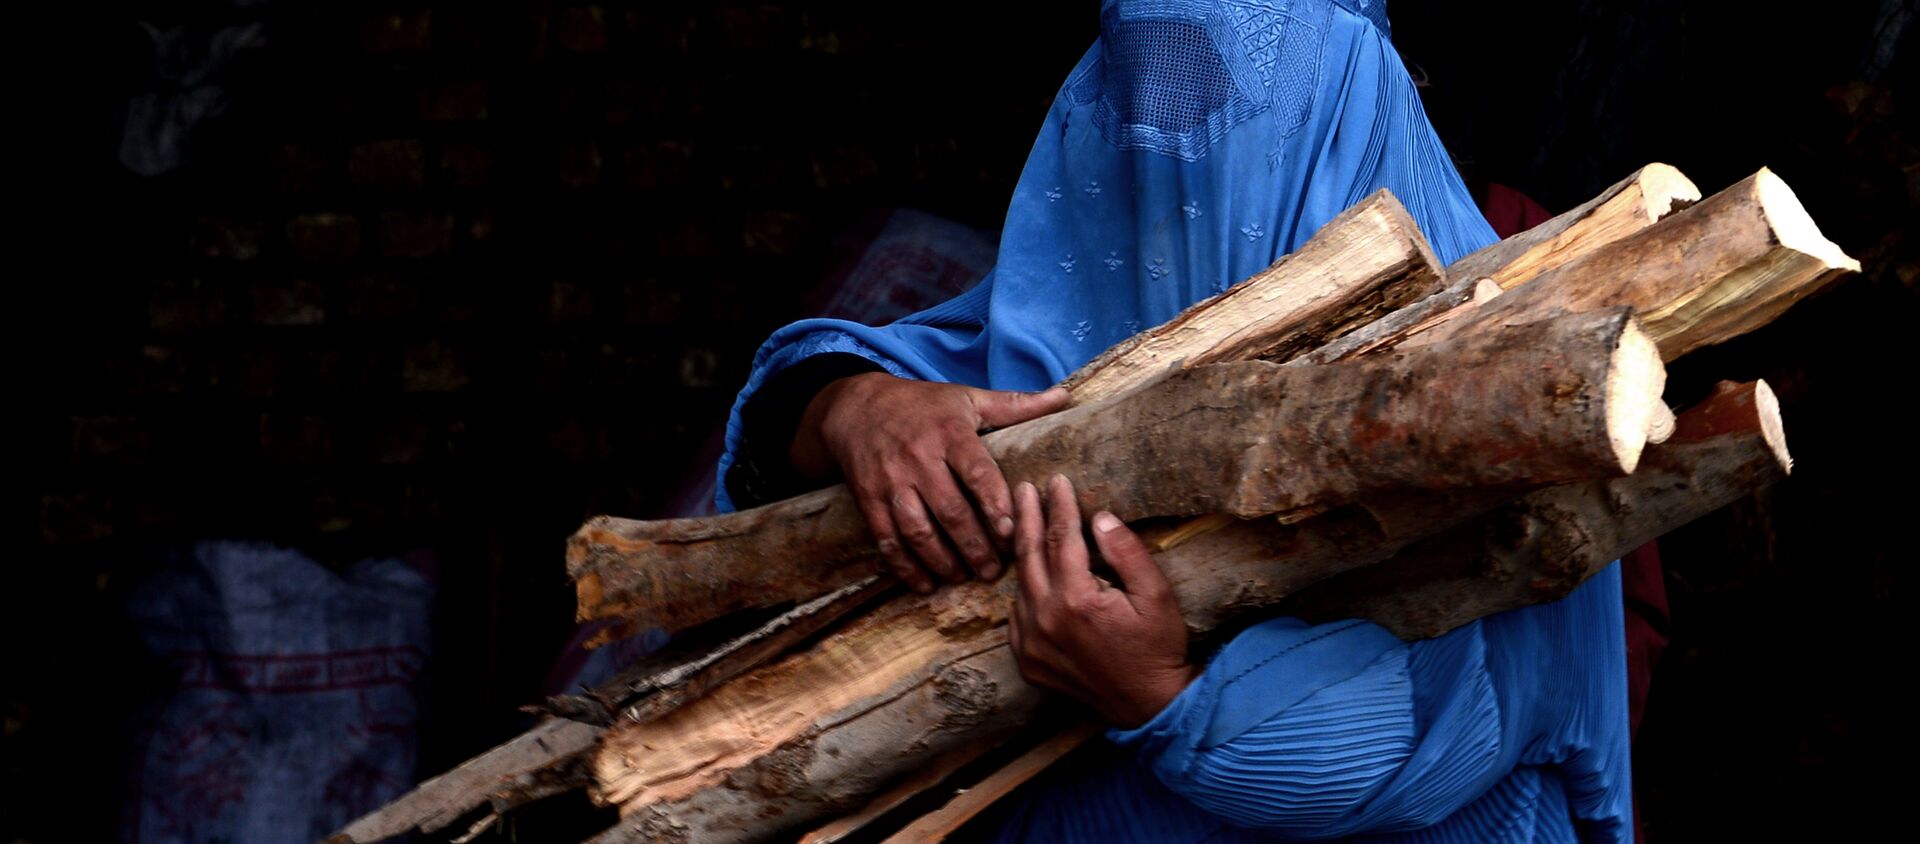 In this photograph taken on February 23, 2015, a burqa-clad Afghan woman carries chopped logs after buying them at a firewood yard in Herat - Sputnik International, 1920